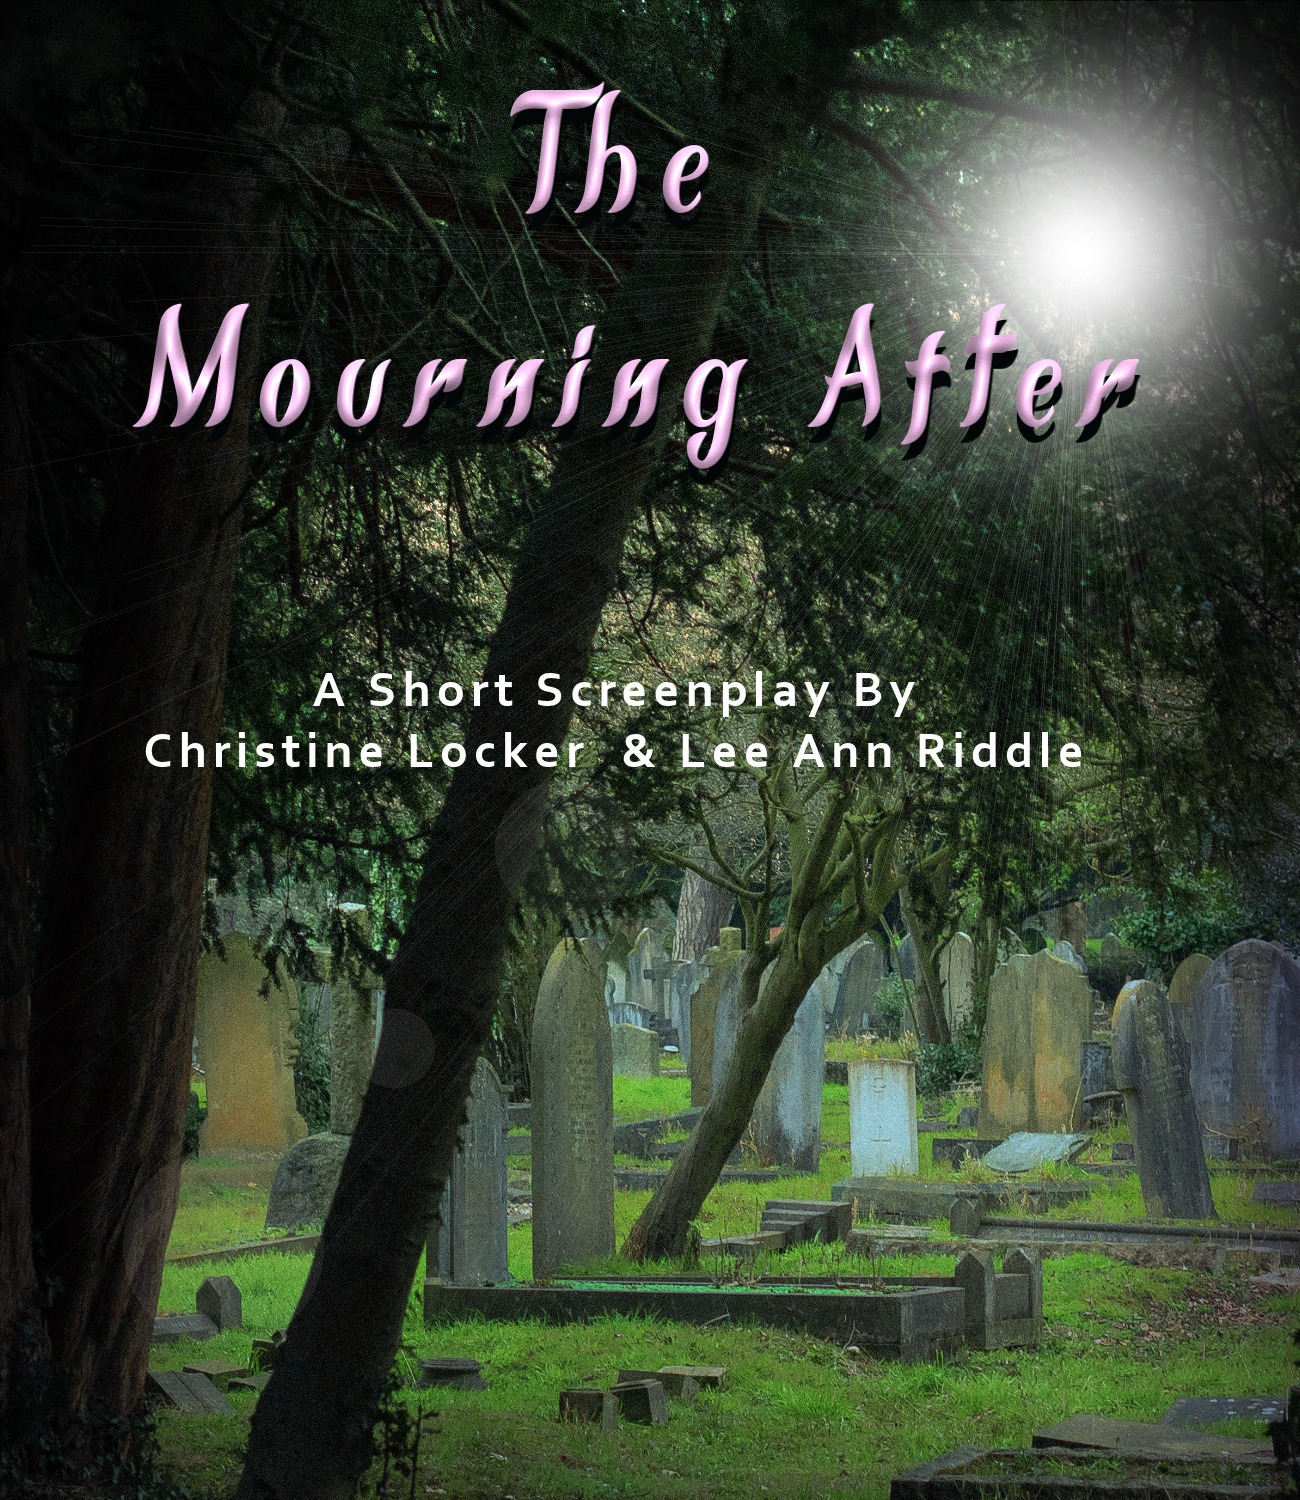 THE MOURNING AFTER